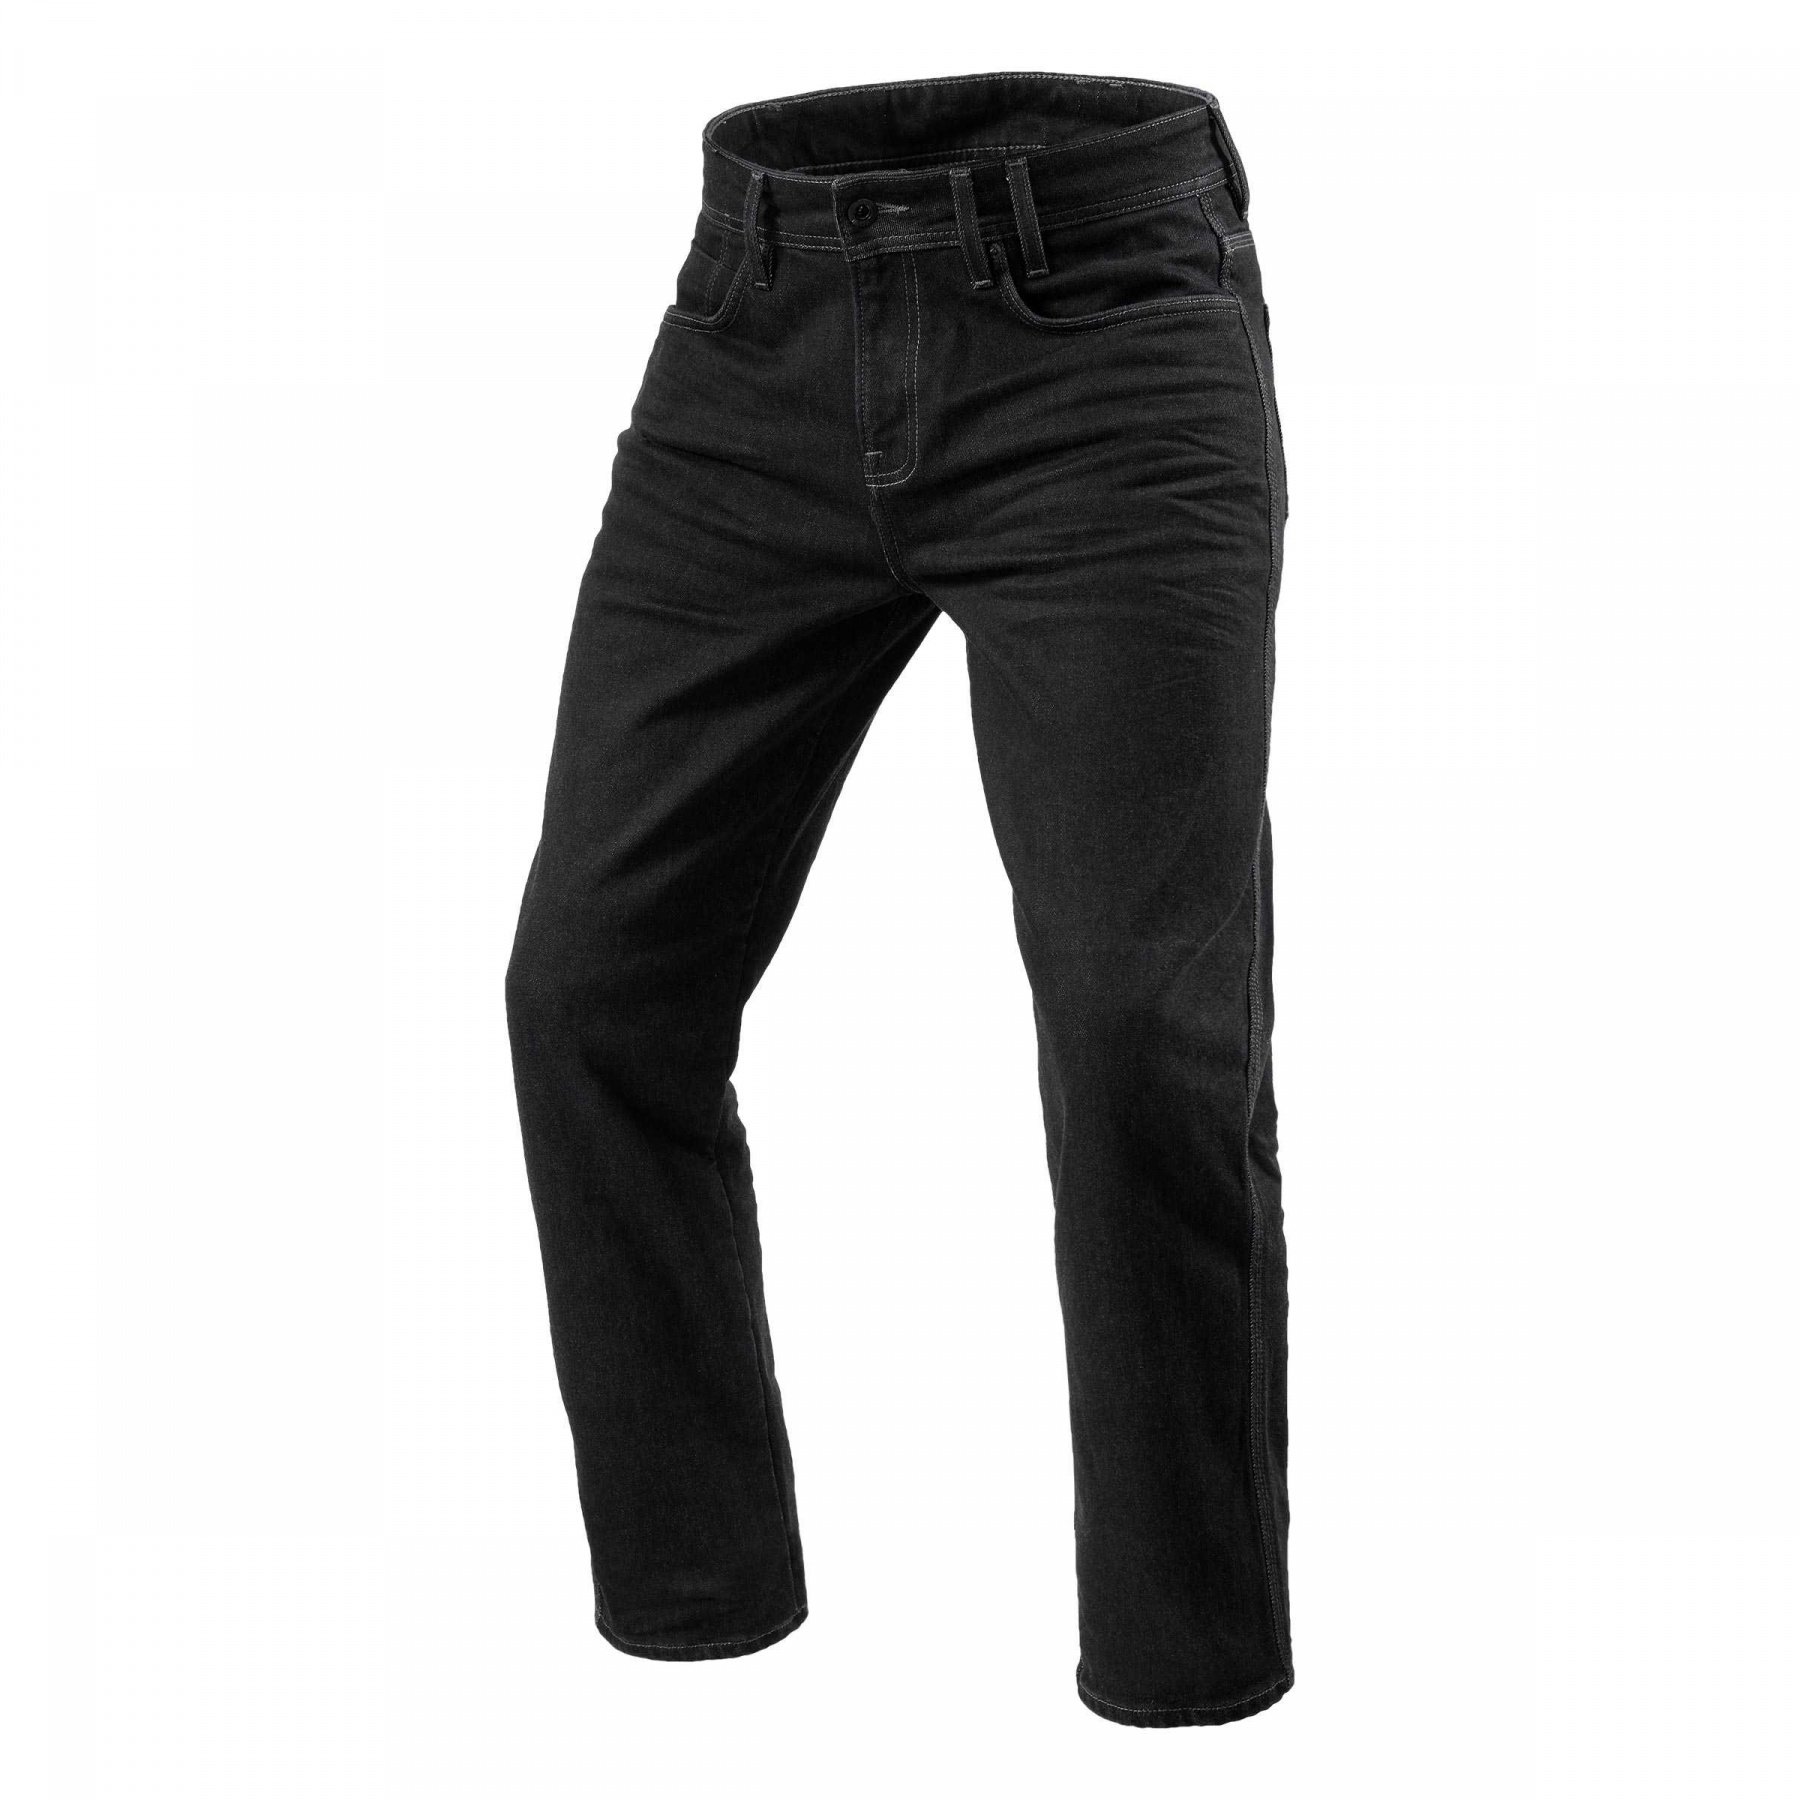 Image of REV'IT! Jeans Lombard 3 RF Dark Blue Used Motorcycle Jeans Size L32/W30 ID 8700001338325